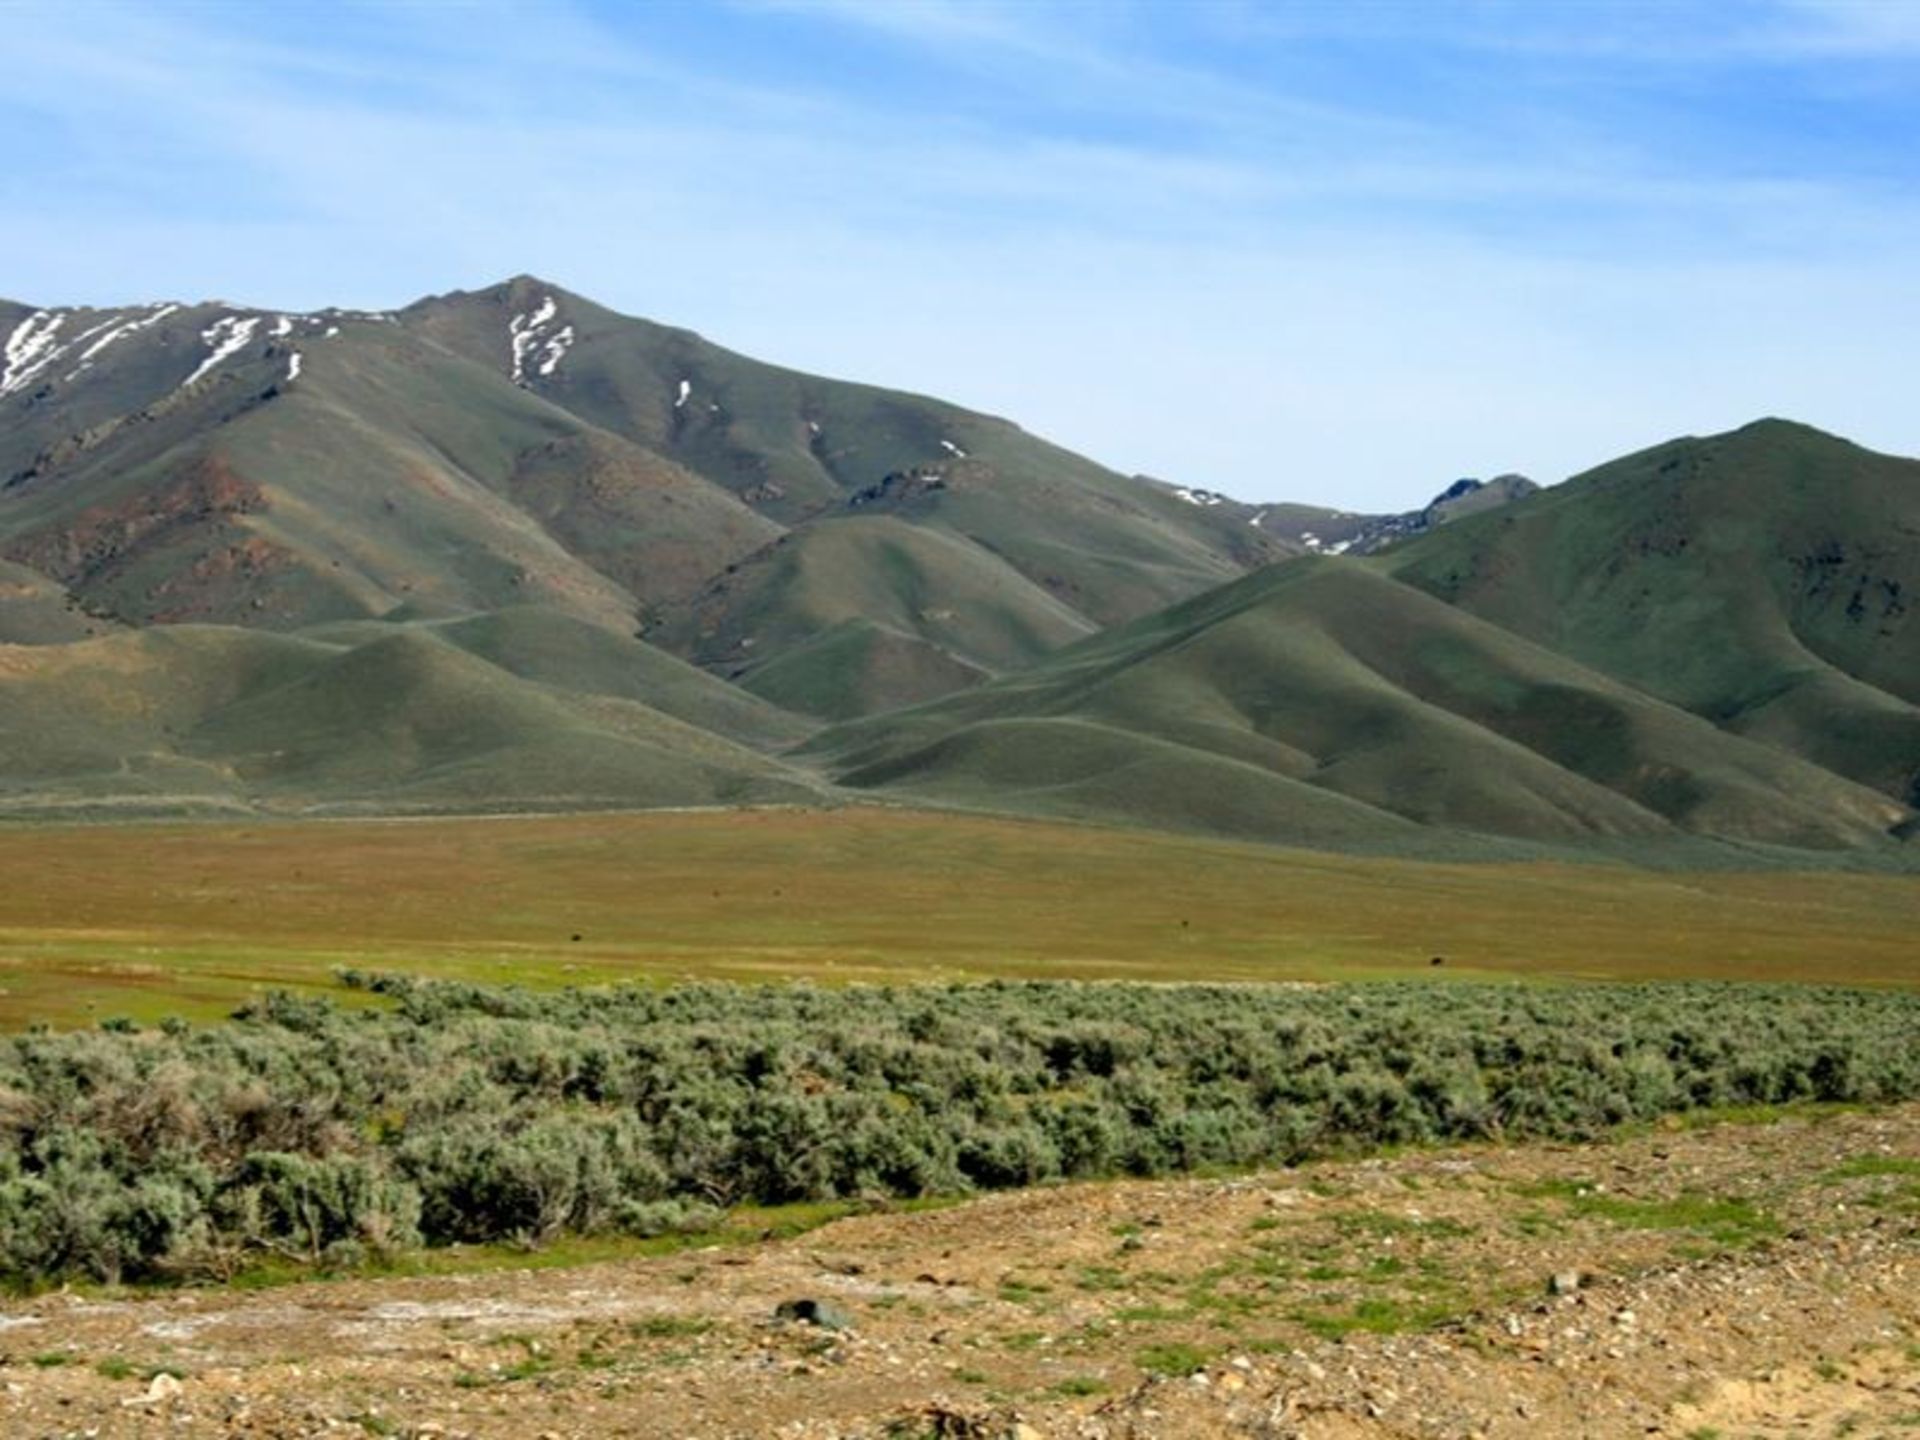 10 Acres of Stunning Landscape: Own a Piece of Nevada's Splendor! - Image 6 of 6